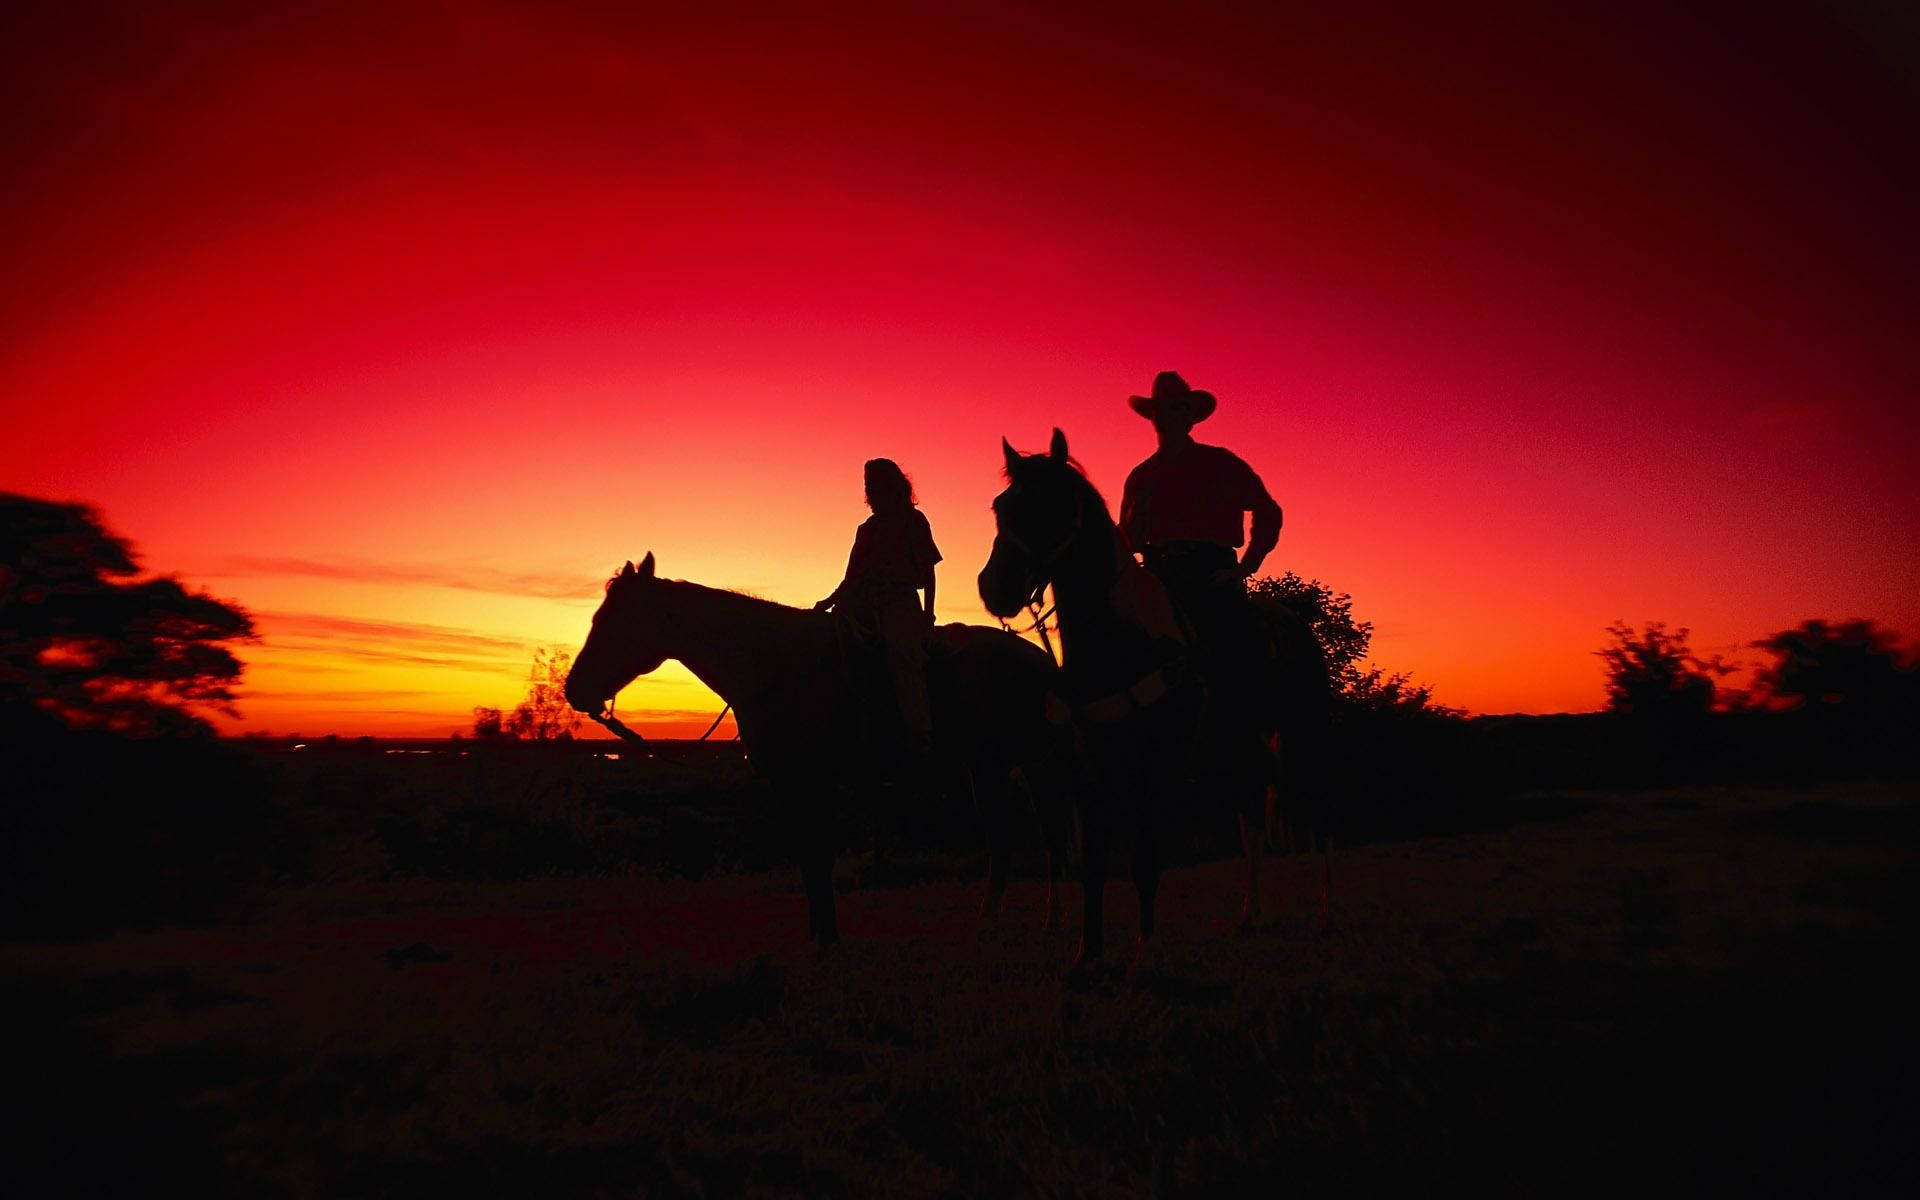 Texas Country Riding Sunset Wallpaper